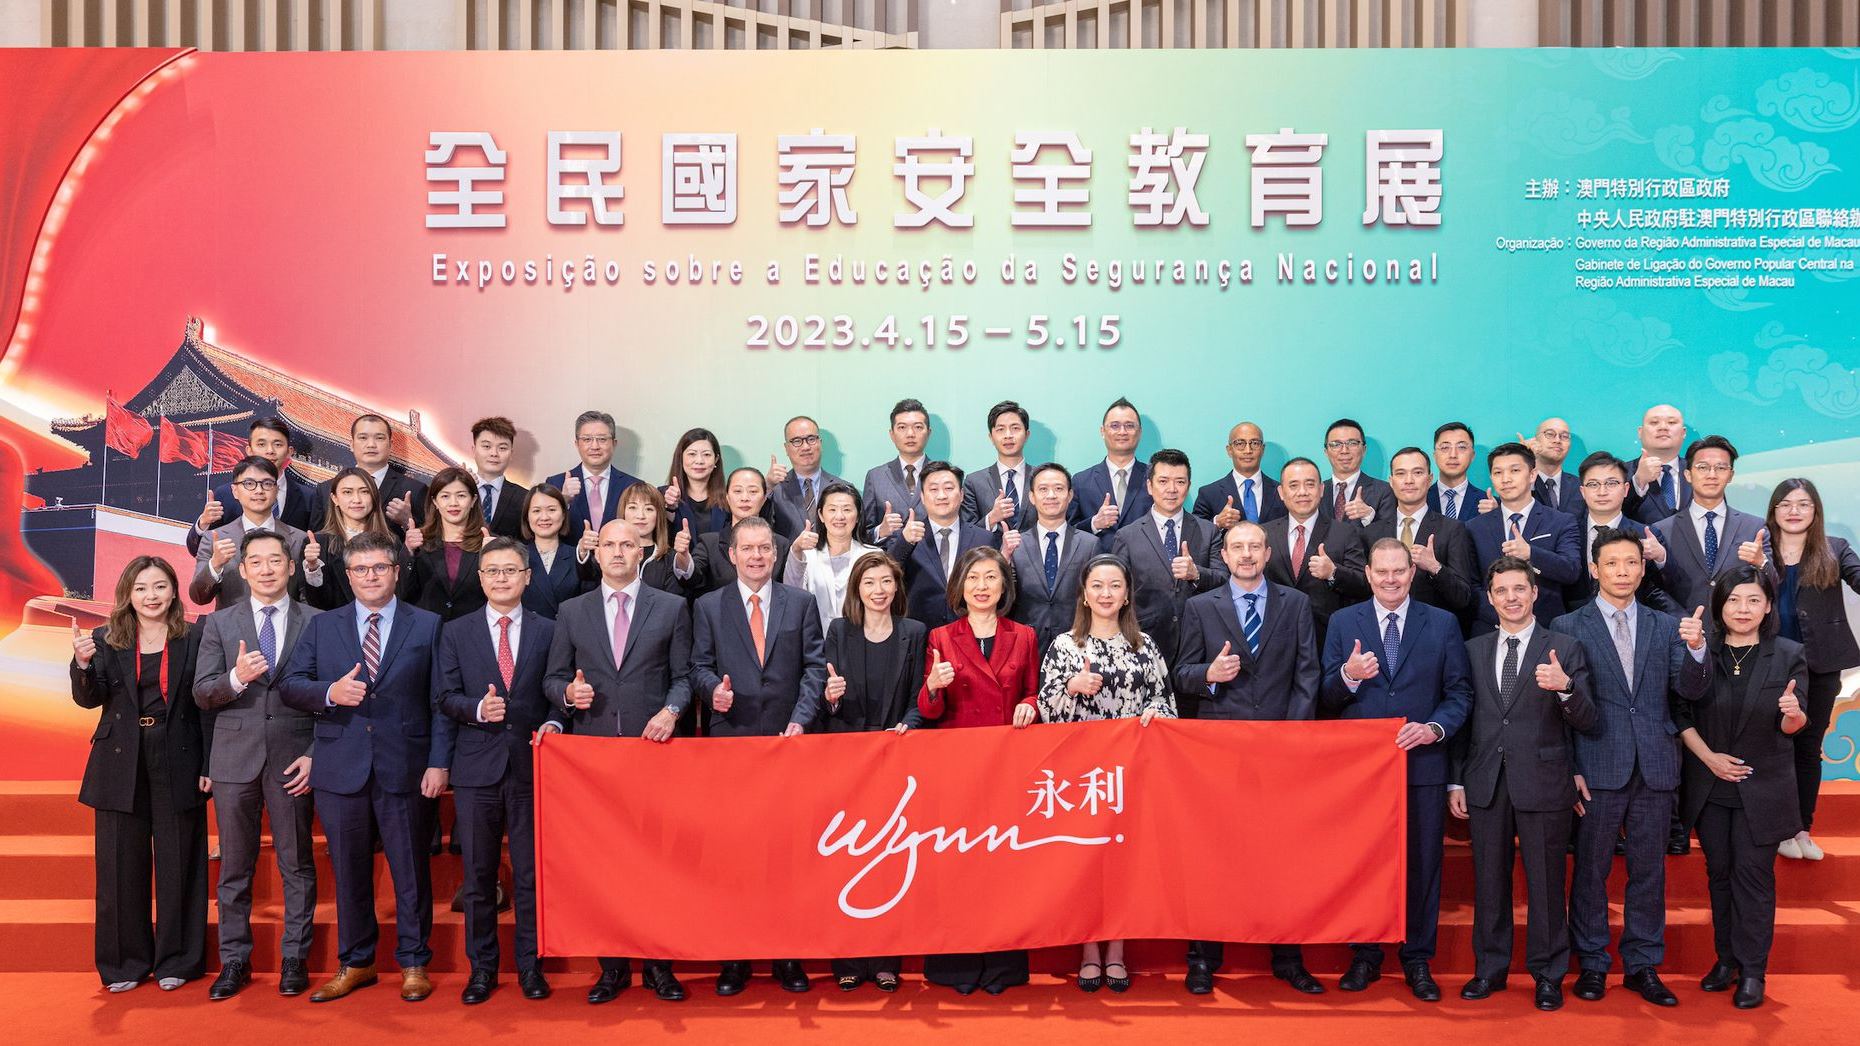 Wynn's 50 management team members visited the "National Security Education Exhibition" on its opening day.